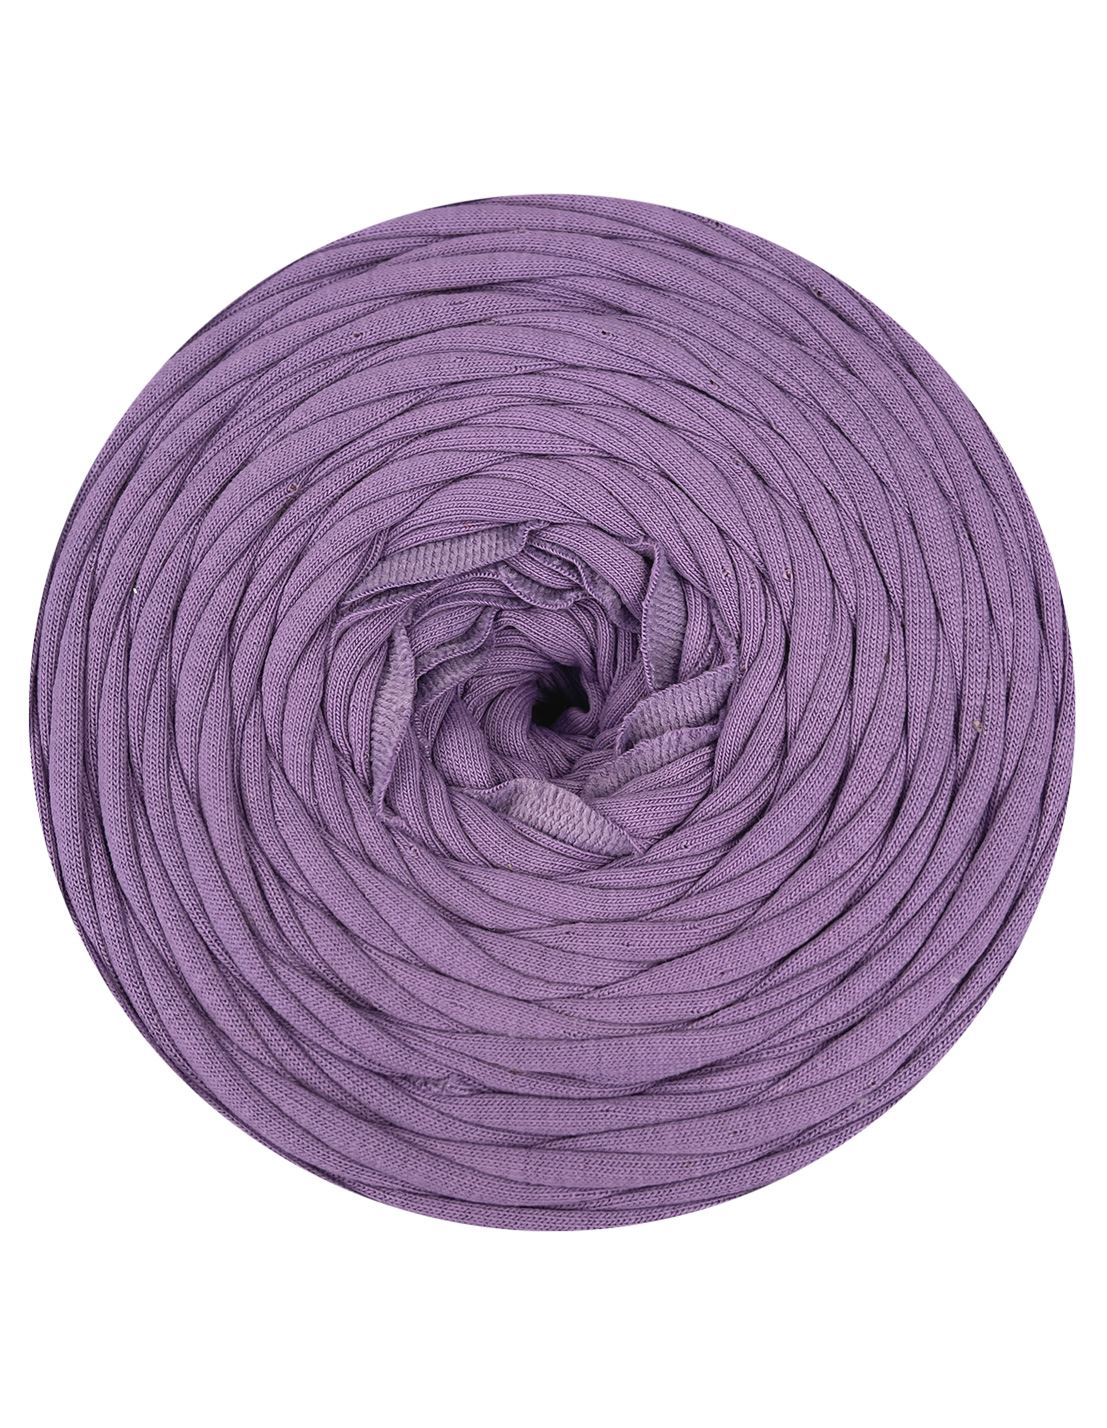 Deep orchid t-shirt yarn by Hoooked Zpagetti (100-120m)